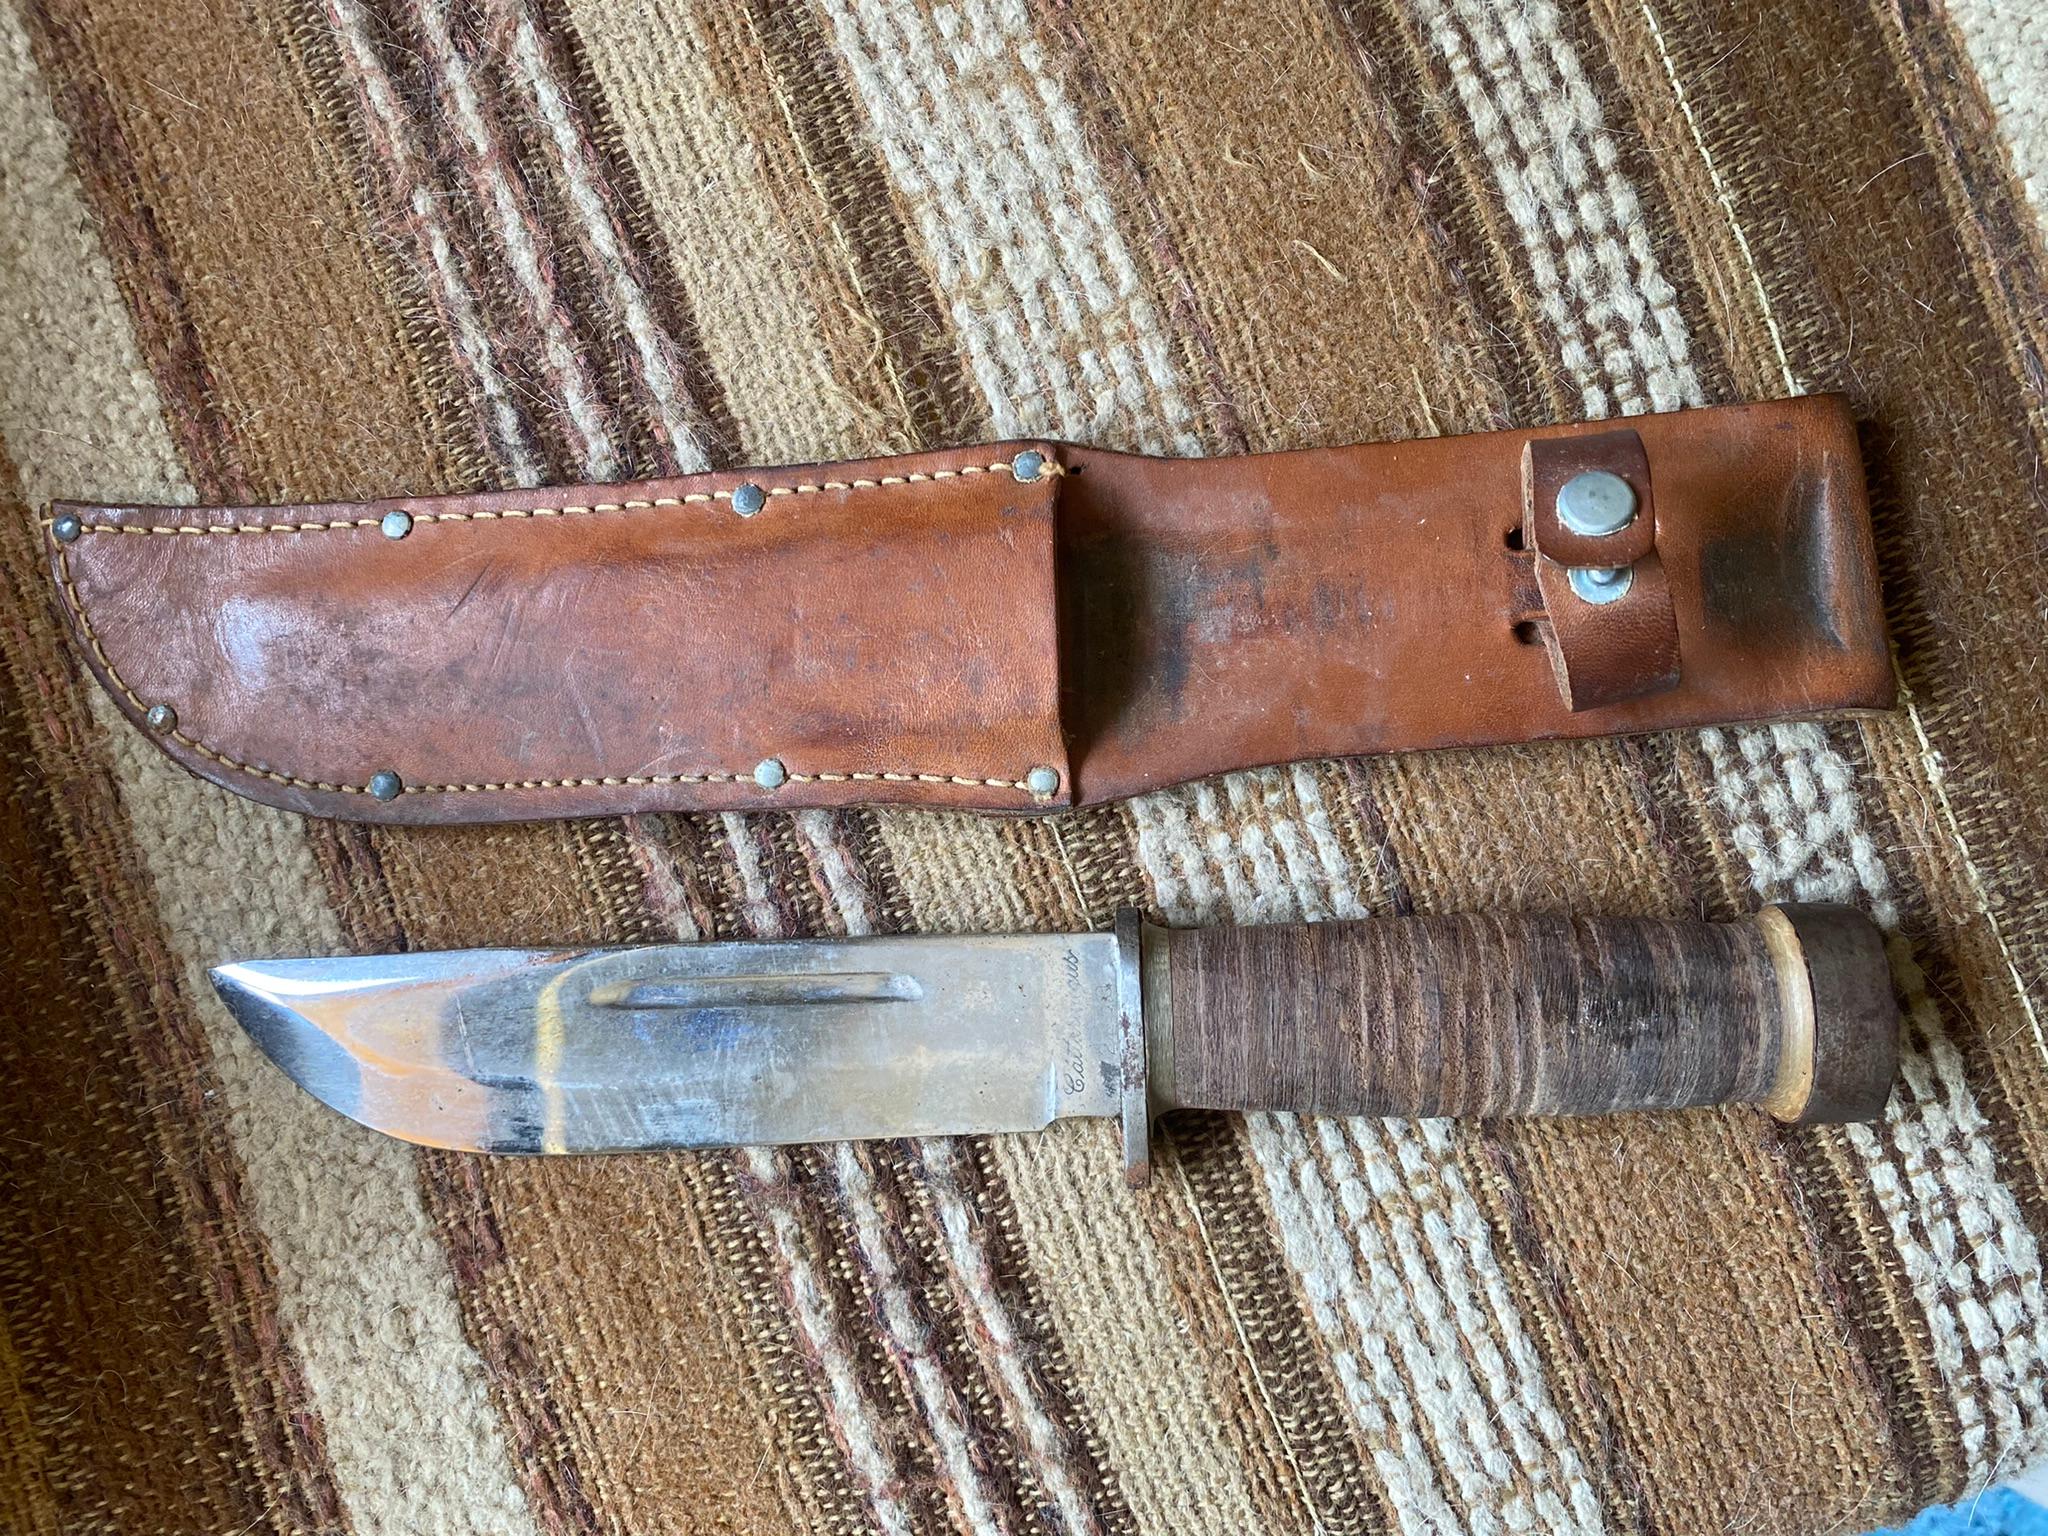 WWII Cattaraugus Large Fighting Knife in nice condition